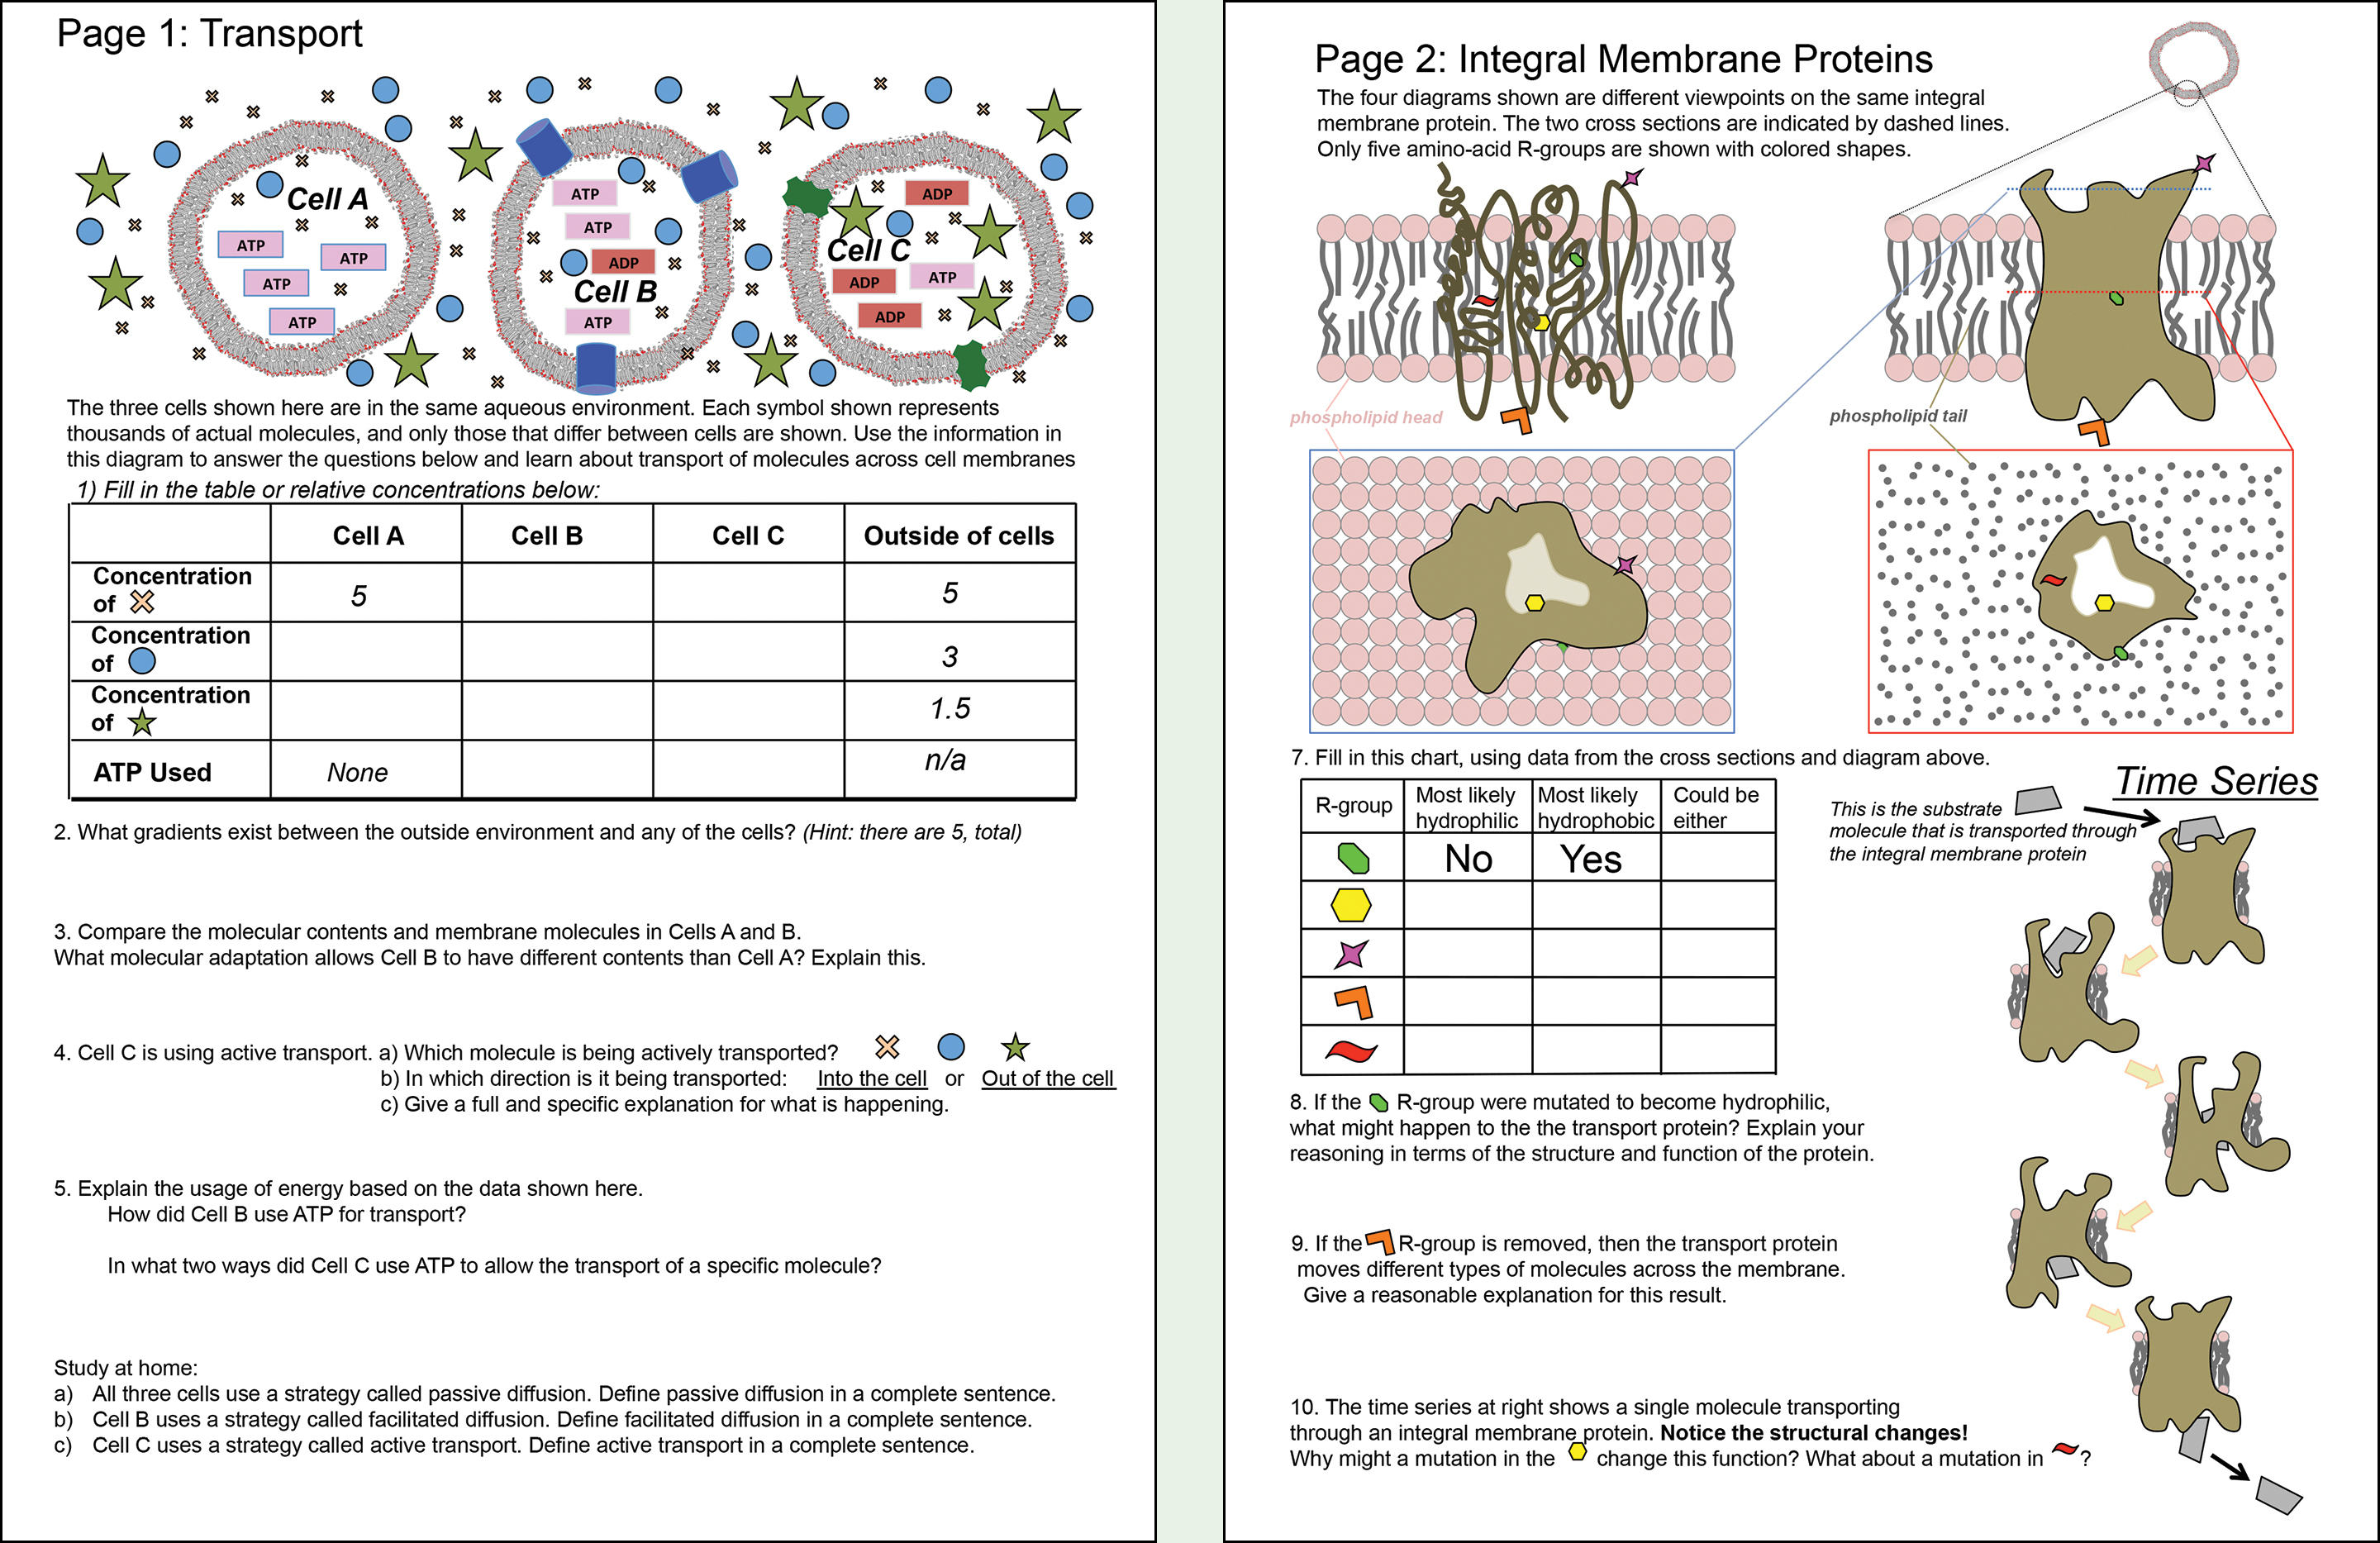 “High-complexity” version of the in-class worksheet.